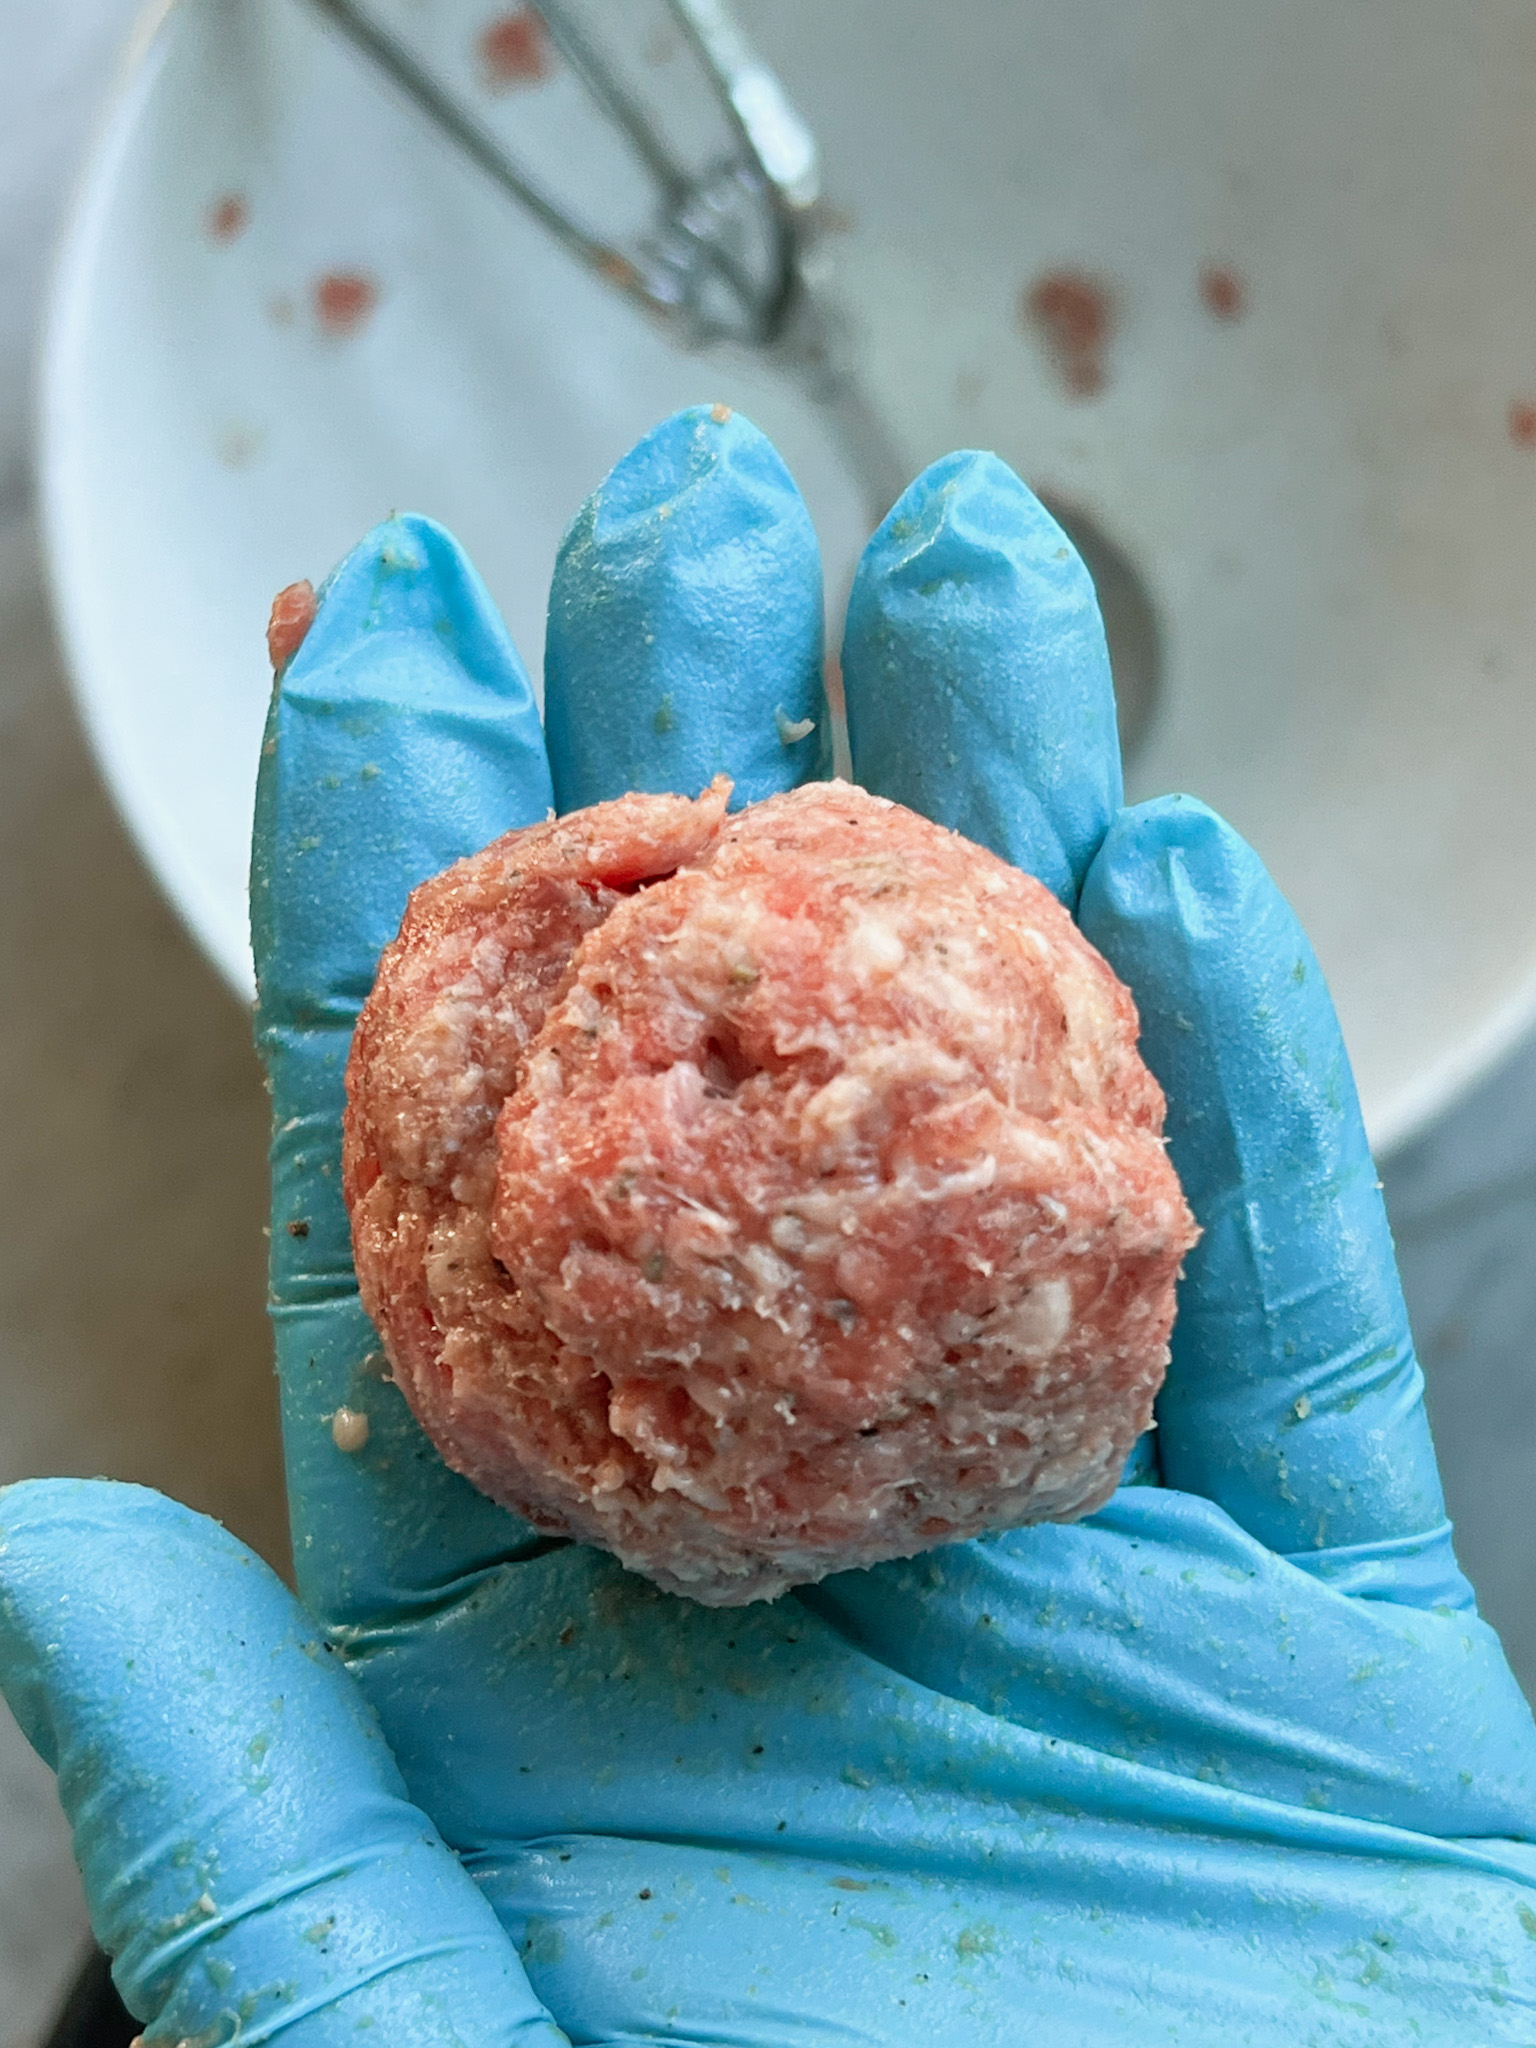 ground beef and breakfast sausage meatball in a hand with a rubber glove